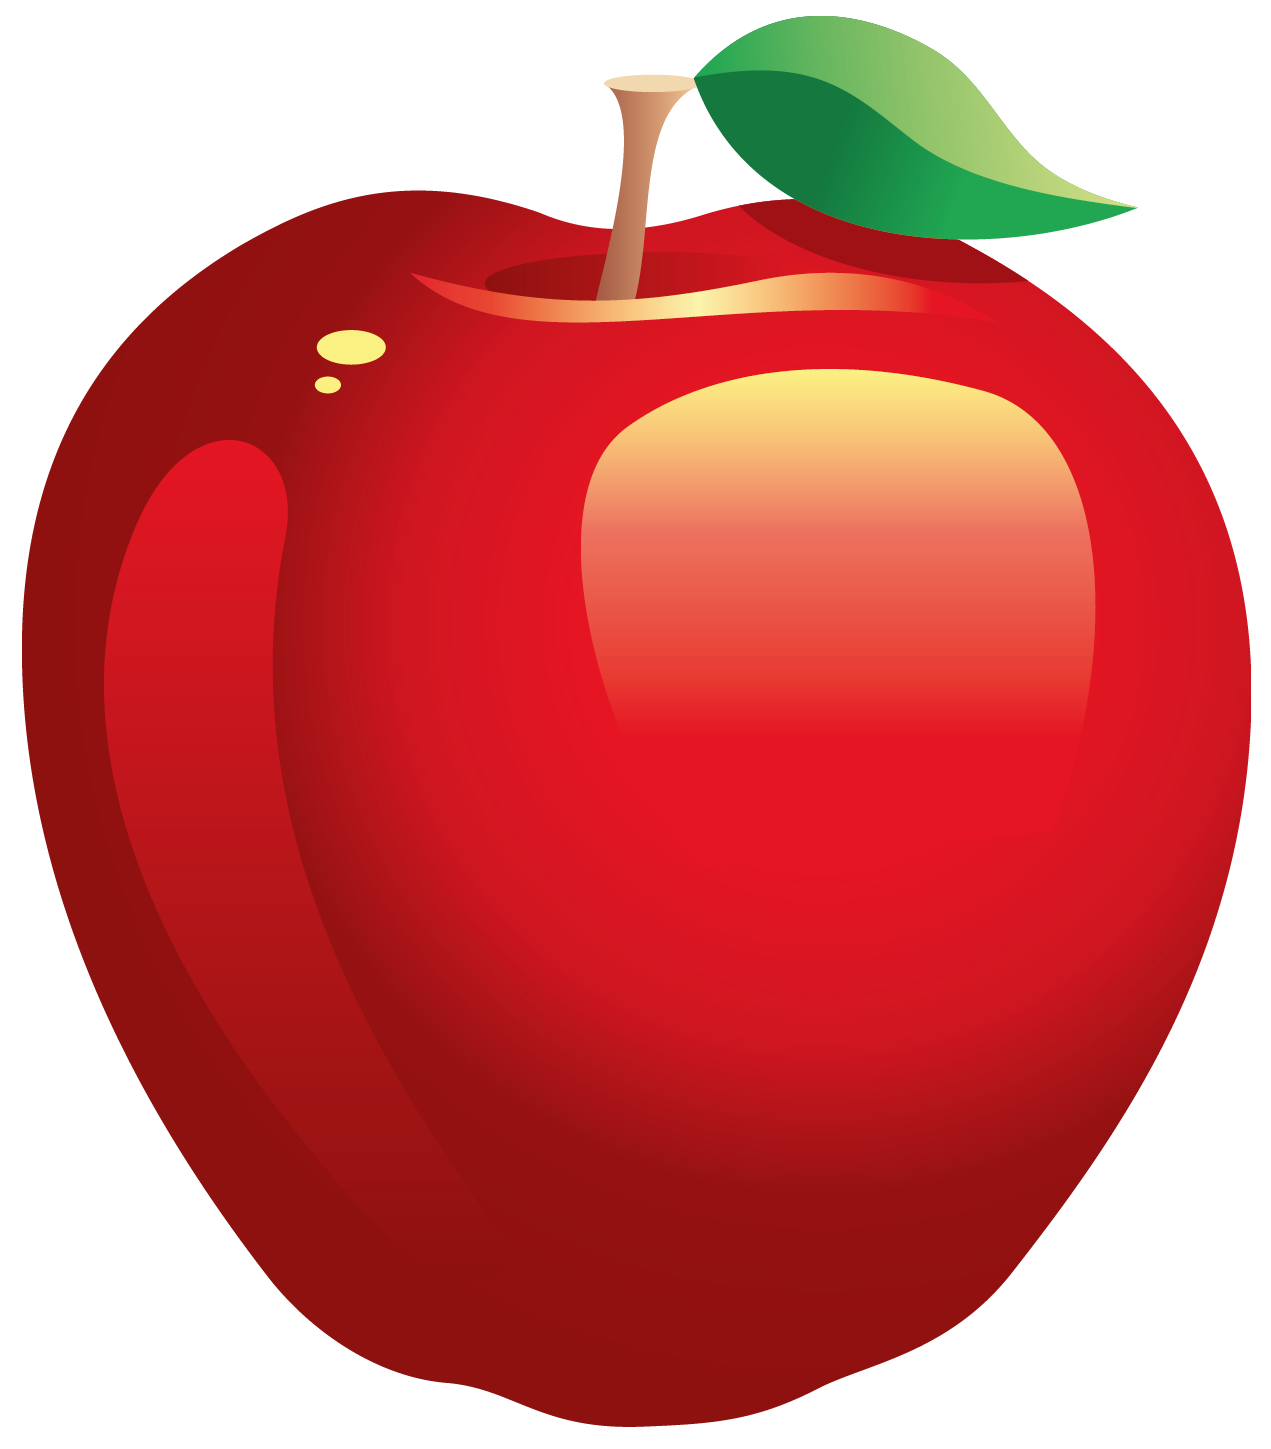 Red apple clipart 2